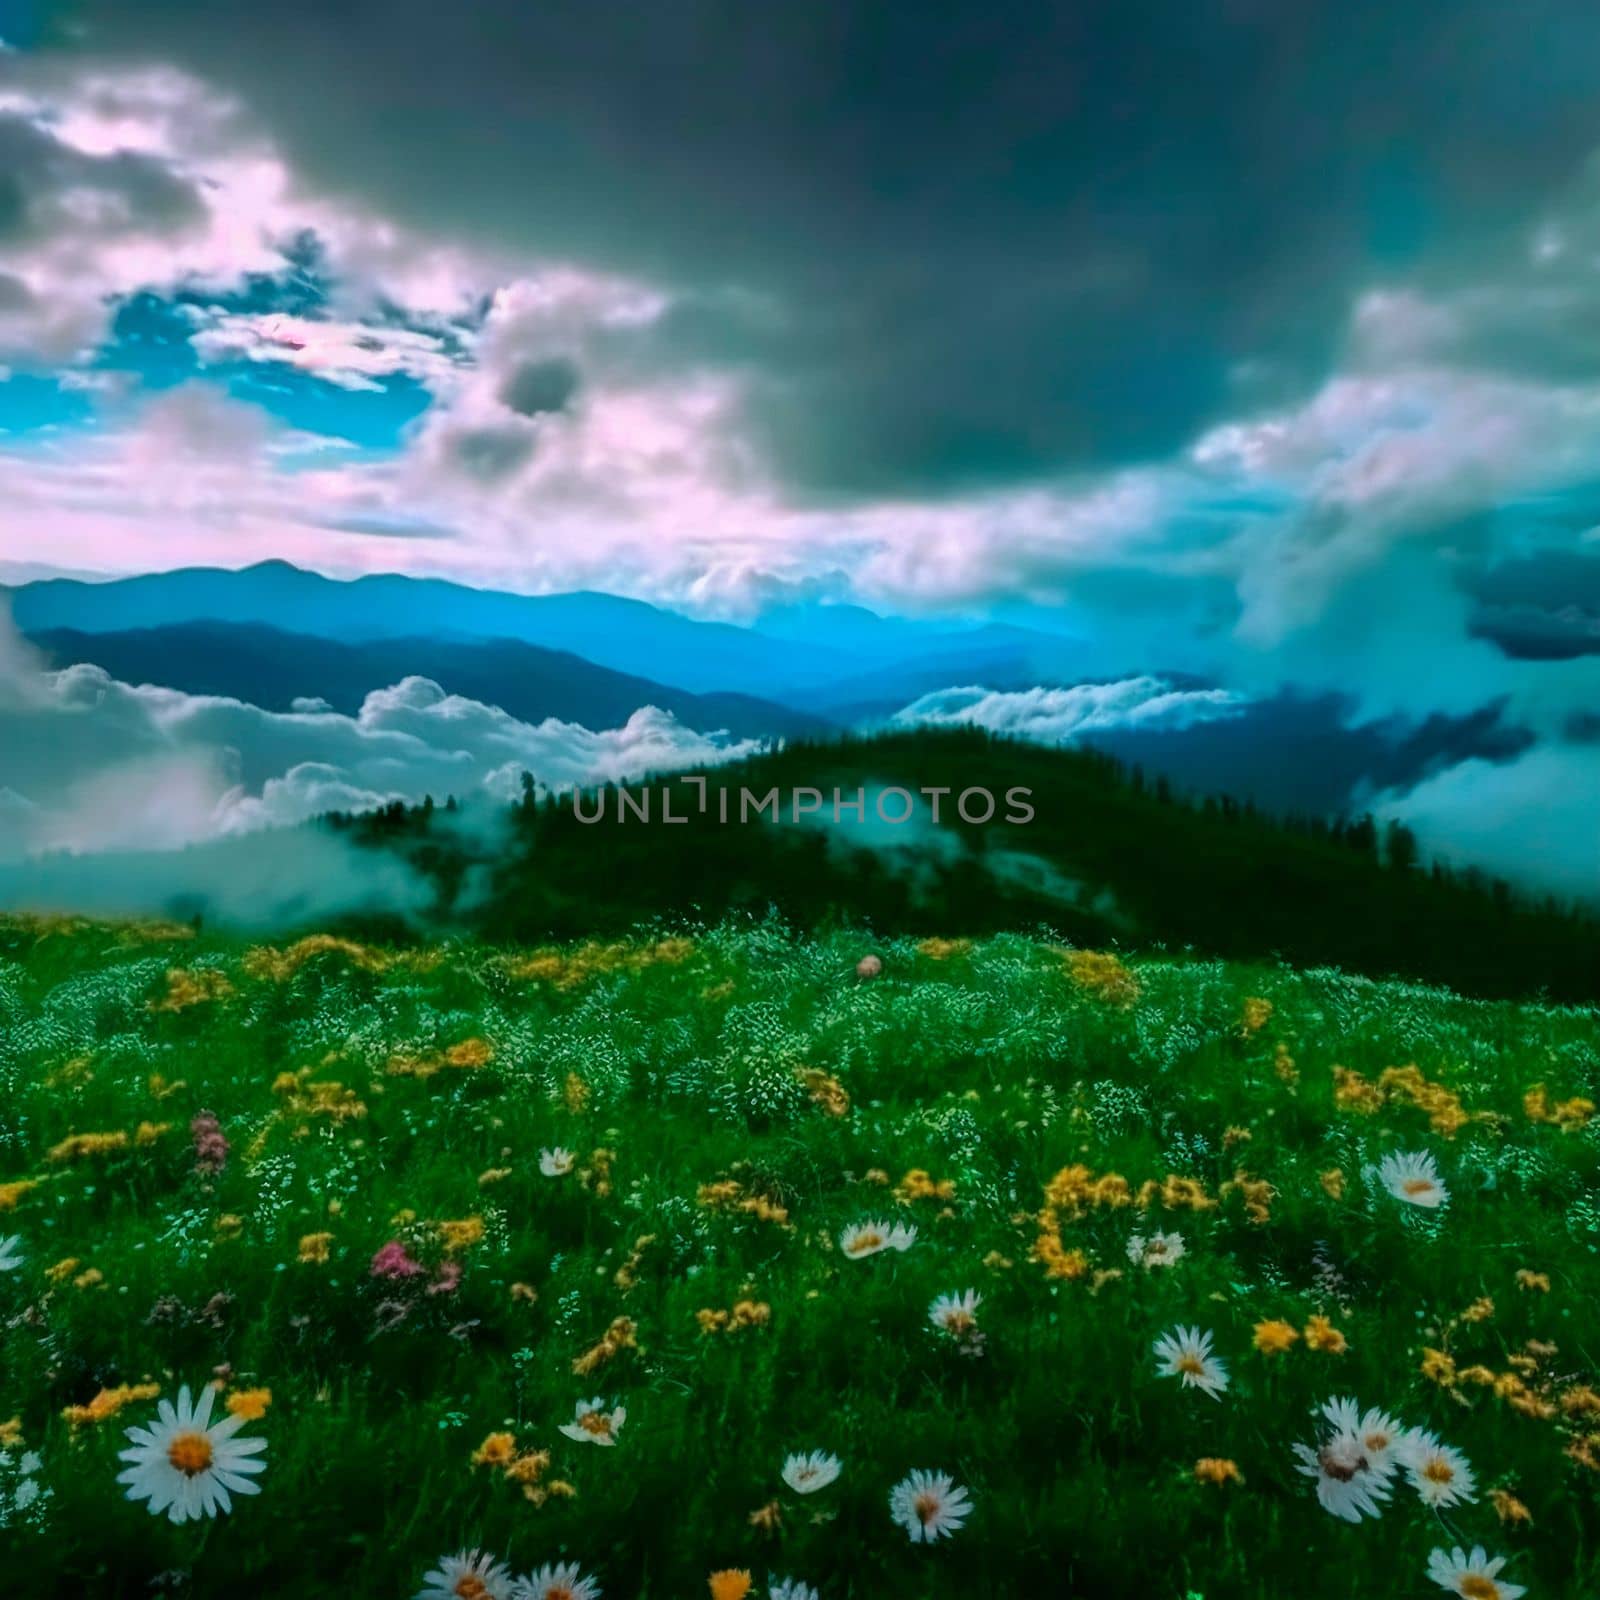 Chamomile field in the mountains by NeuroSky